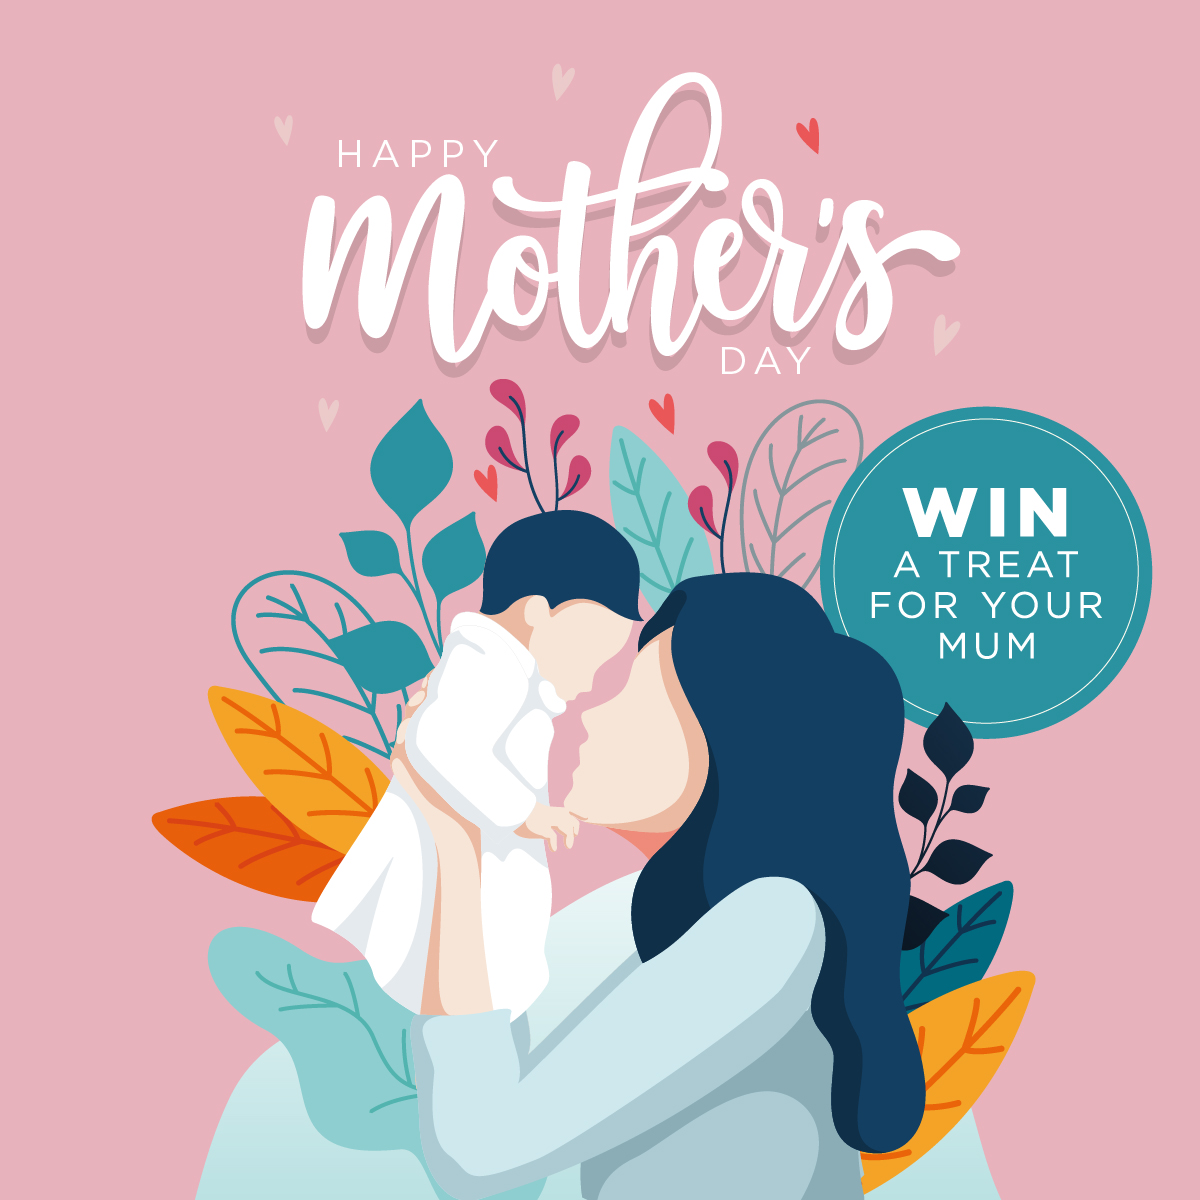 Win an Amazing Mother’s Day Prize!